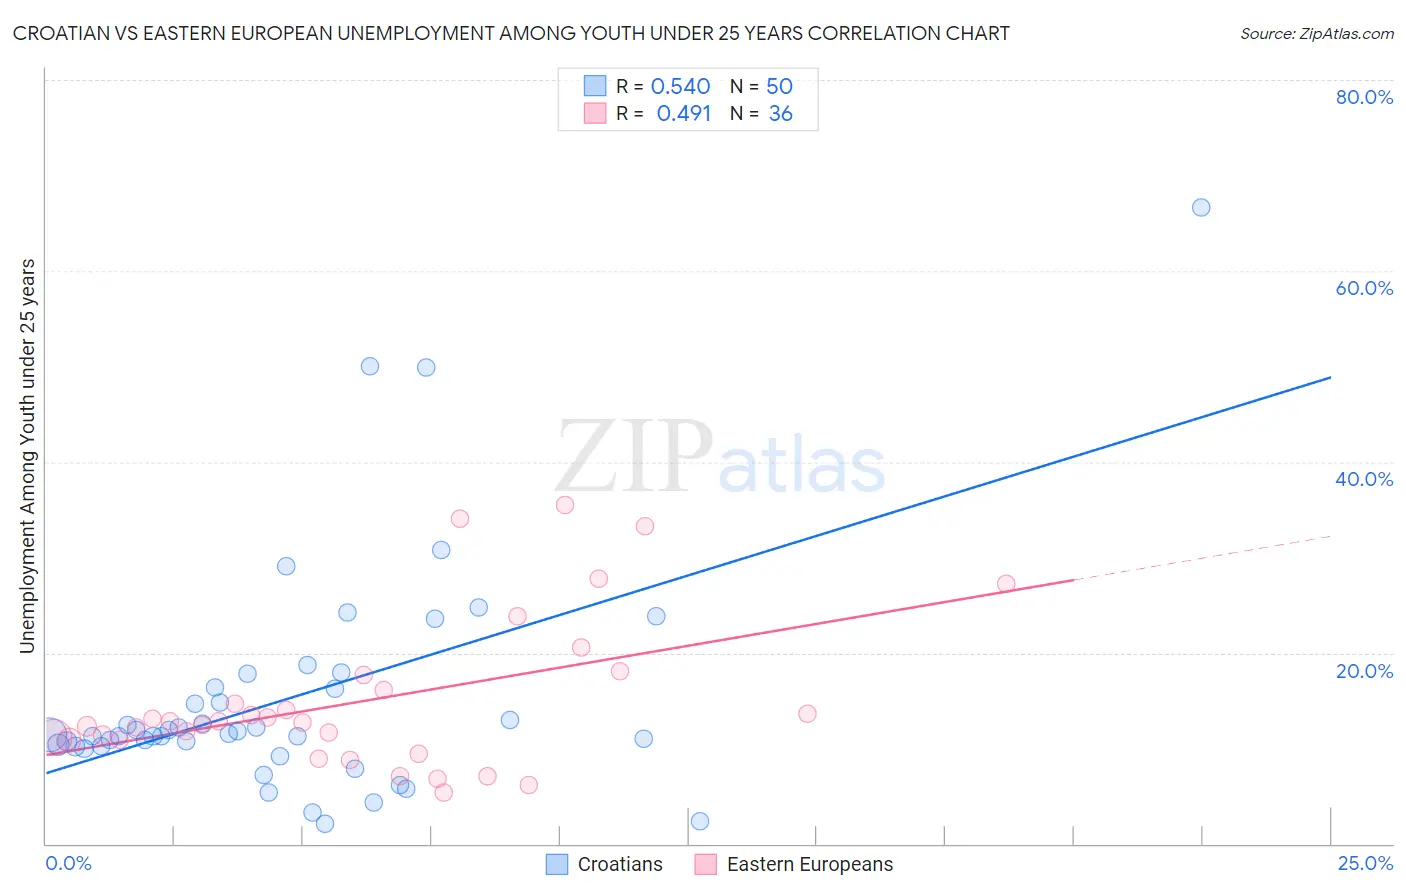 Croatian vs Eastern European Unemployment Among Youth under 25 years